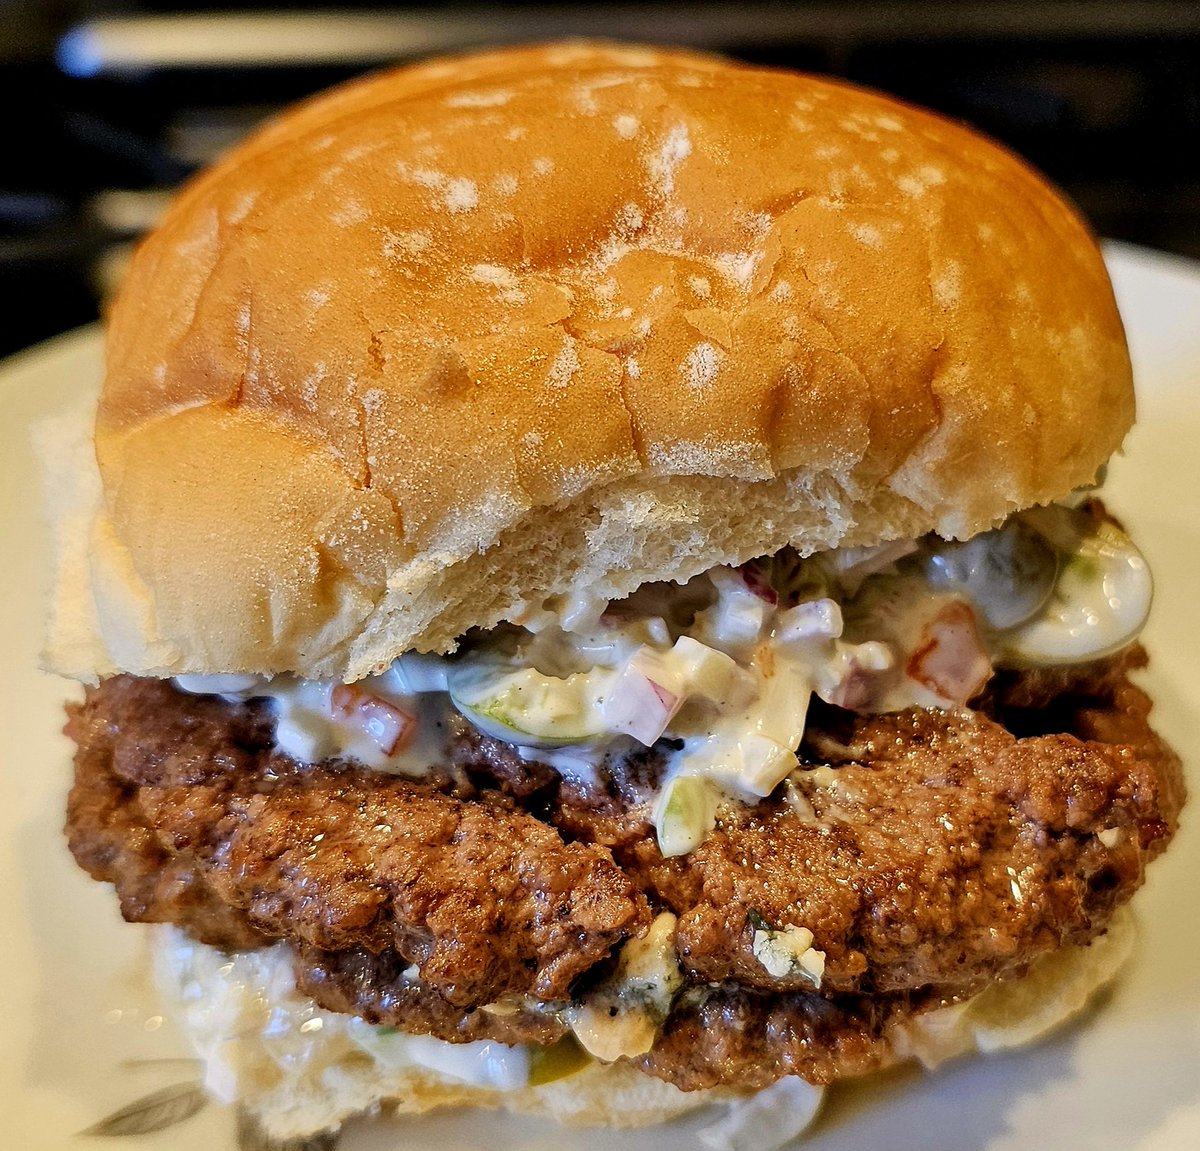 #may21familyfoodnight I don't go to fast food much at all but Burger 81 makes an olive burger that is pretty good. Here is my upgrade on their burger. Two smash burgers, with blue cheese in-between, sauce is mayo, manzanilla and castelvetrano olives, shallot and garlic, yum!